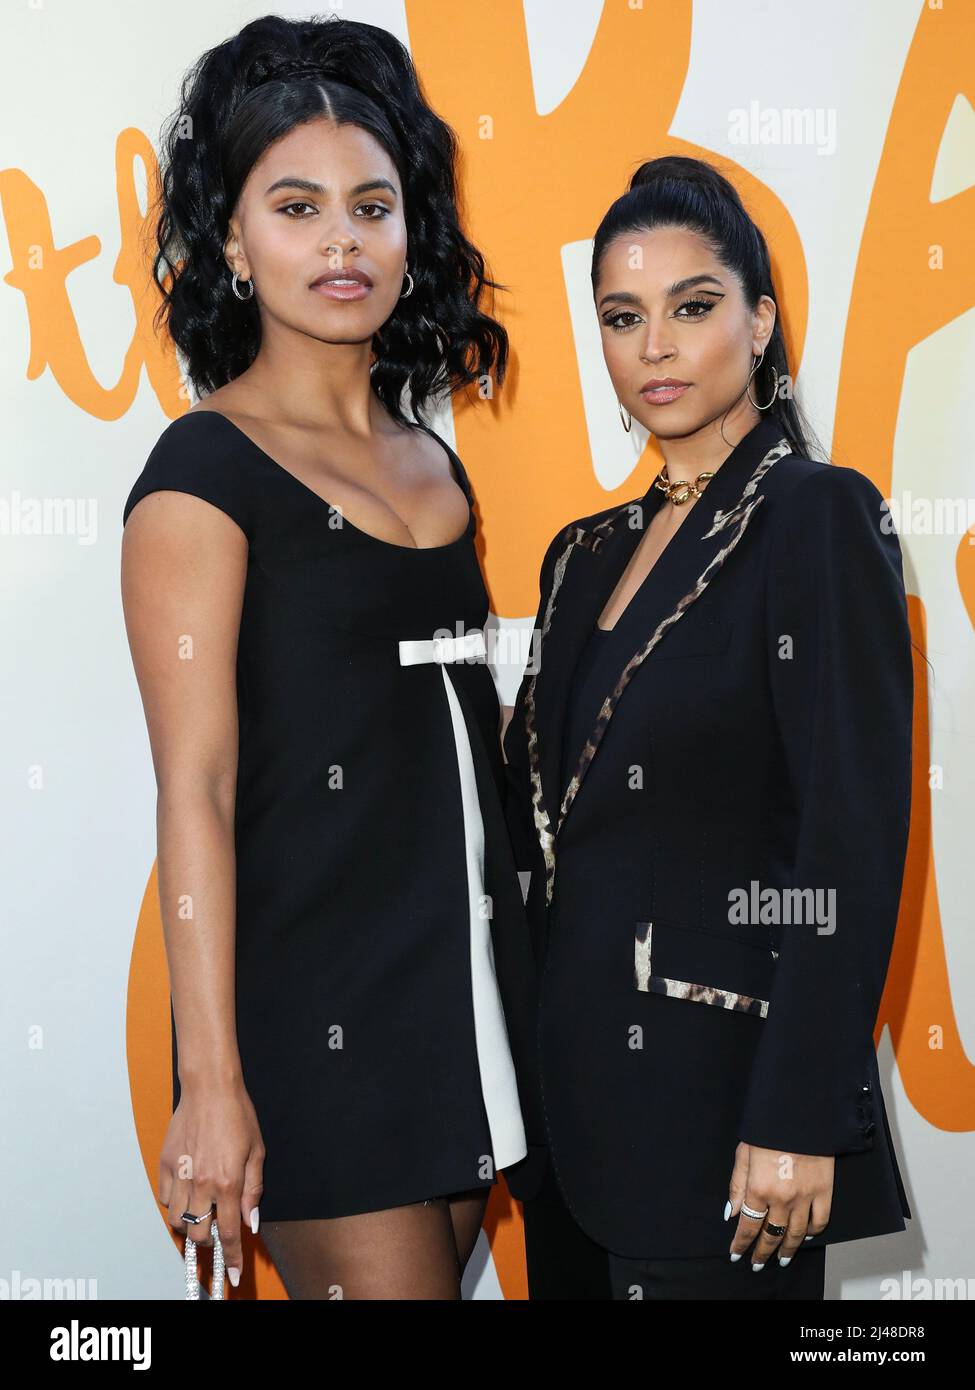 Los Angeles, United States. 12th Apr, 2022. LOS ANGELES, CALIFORNIA, USA -  APRIL 12: German-American actress Zazie Beetz and Canadian comedian Lilly  Singh arrive at the Los Angeles Special Screening Of DreamWorks